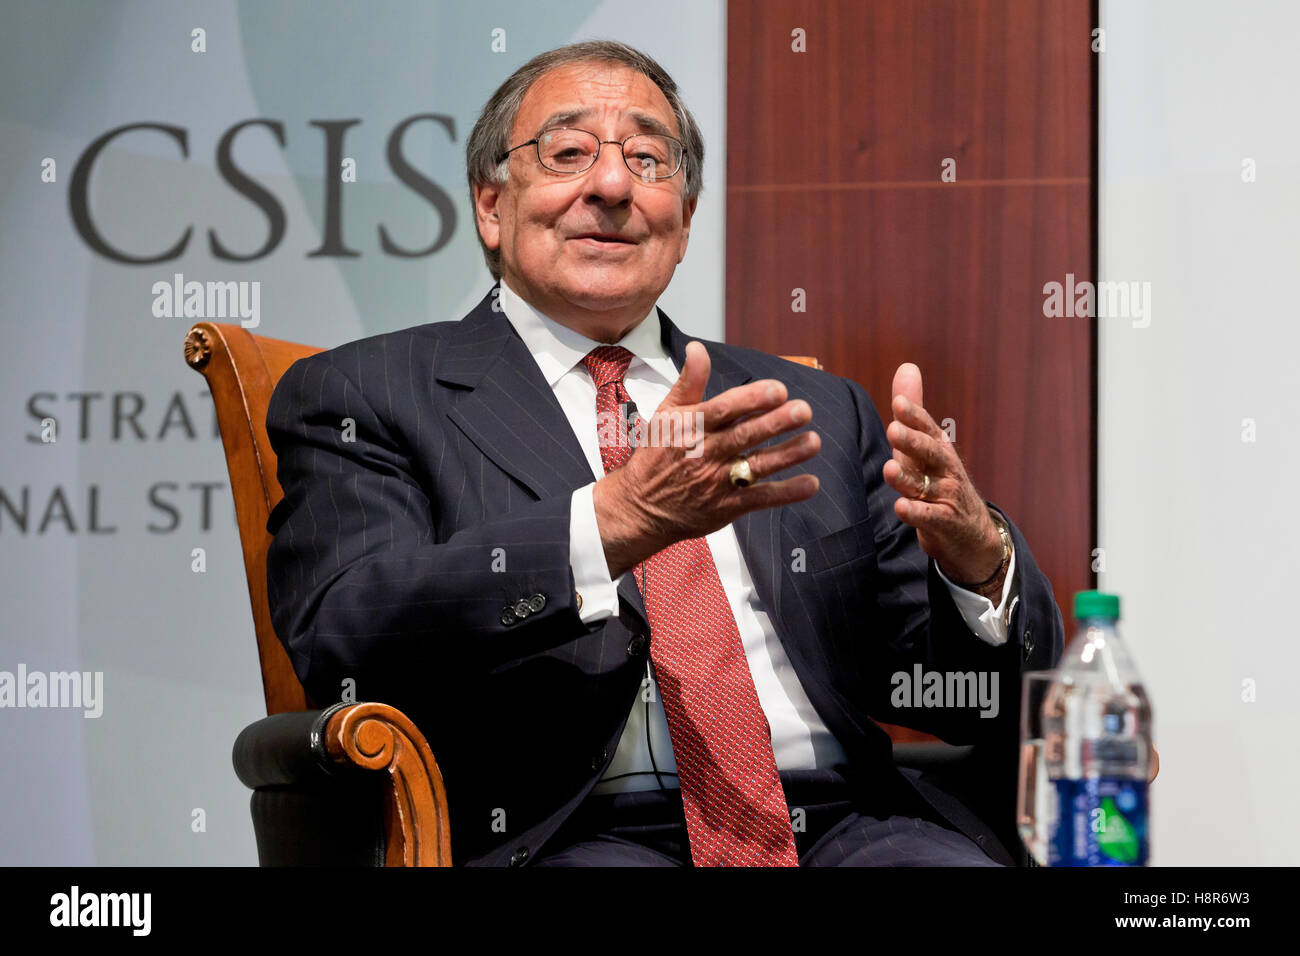 Washington, DC, USA. , . Former Secretary of Defense and Director of CIA, Leon Panetta, speaks at Center for Strategic & International Studies on "Turning Point - A New Comprehensive Strategy for Countering Violent Extremism" program launch. Credit:  B Christopher/Alamy Live News Stock Photo